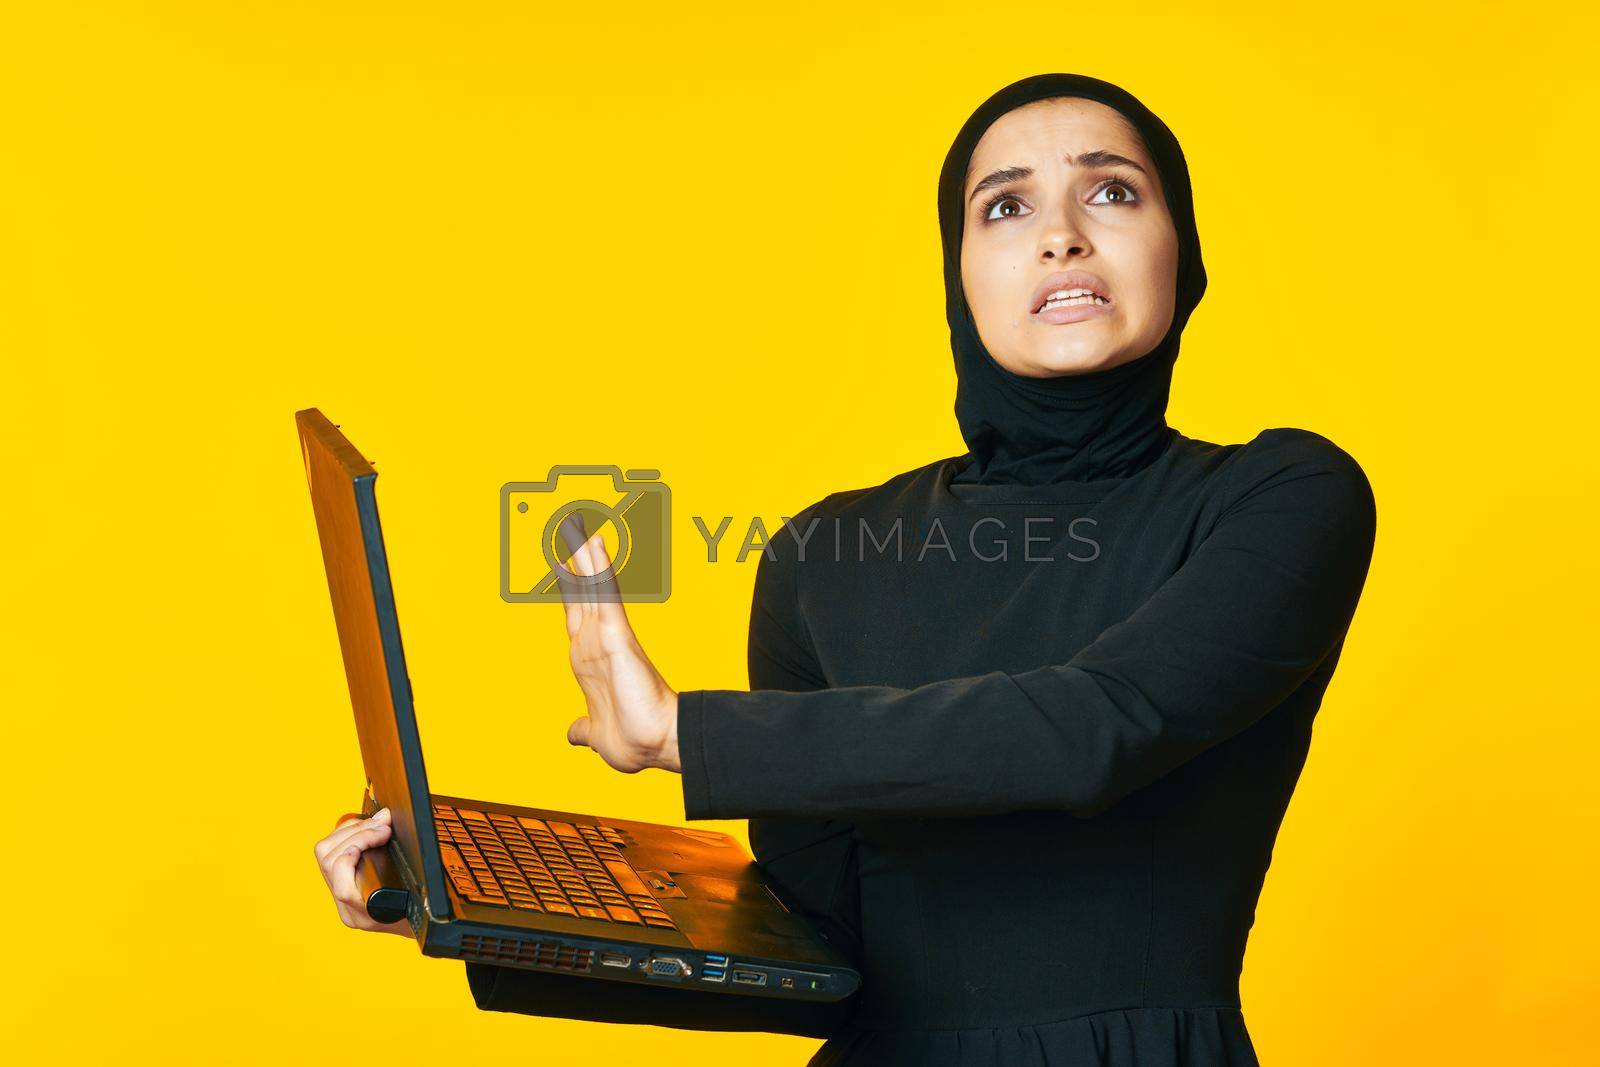 Royalty free image of pretty woman arab clothing laptop technology internet ethnicity model by Vichizh